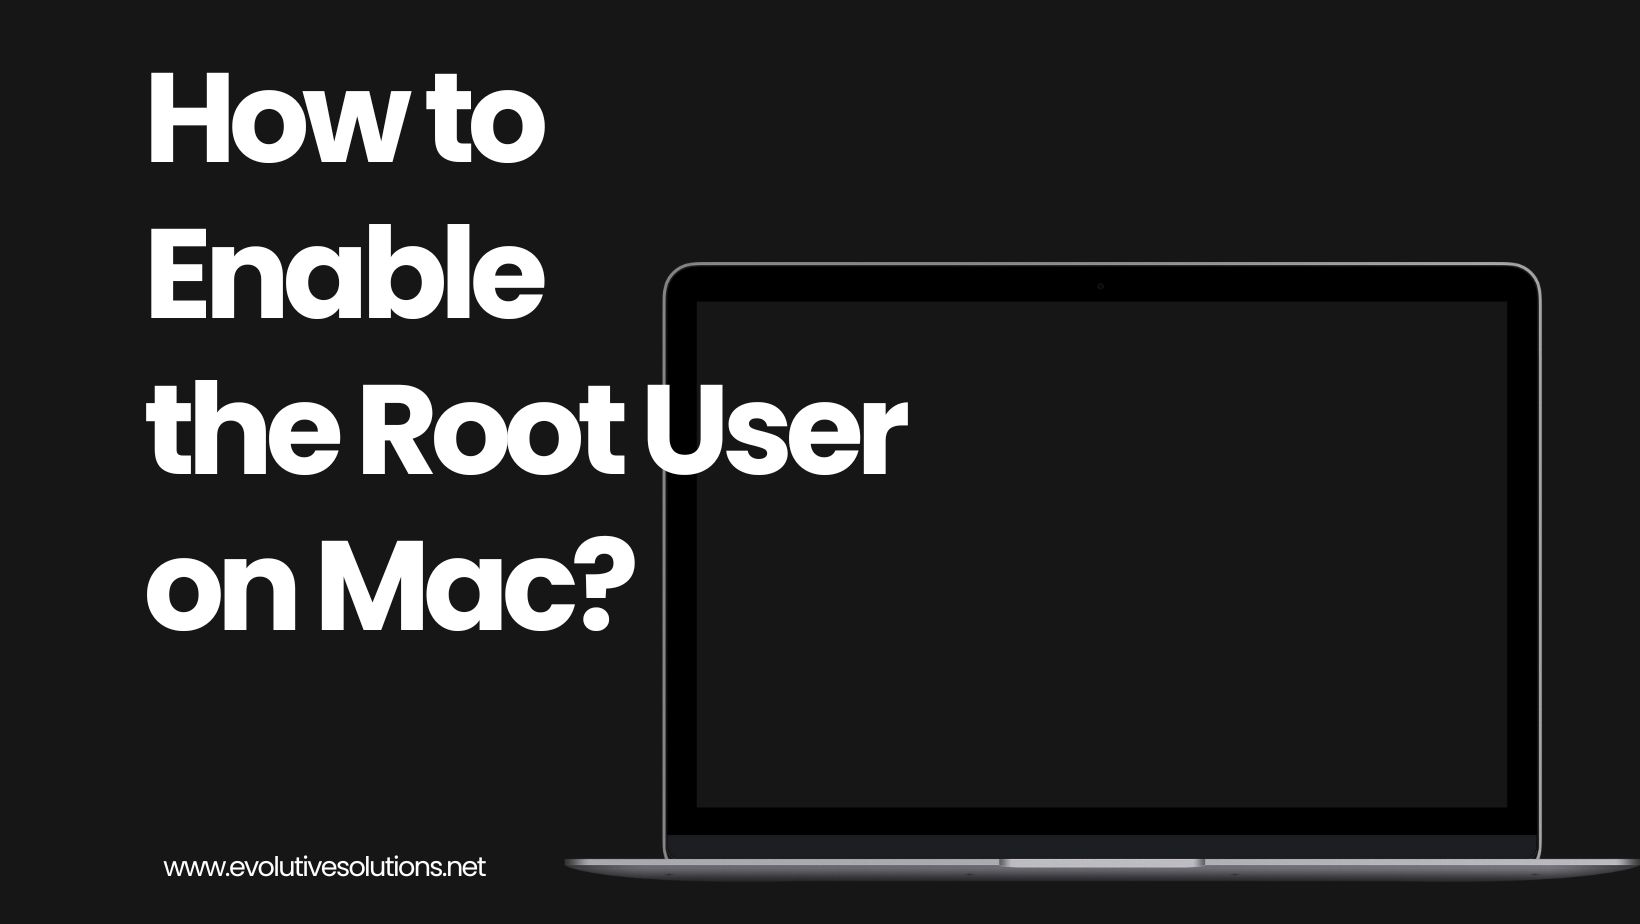 How to Enable the Root User on Mac